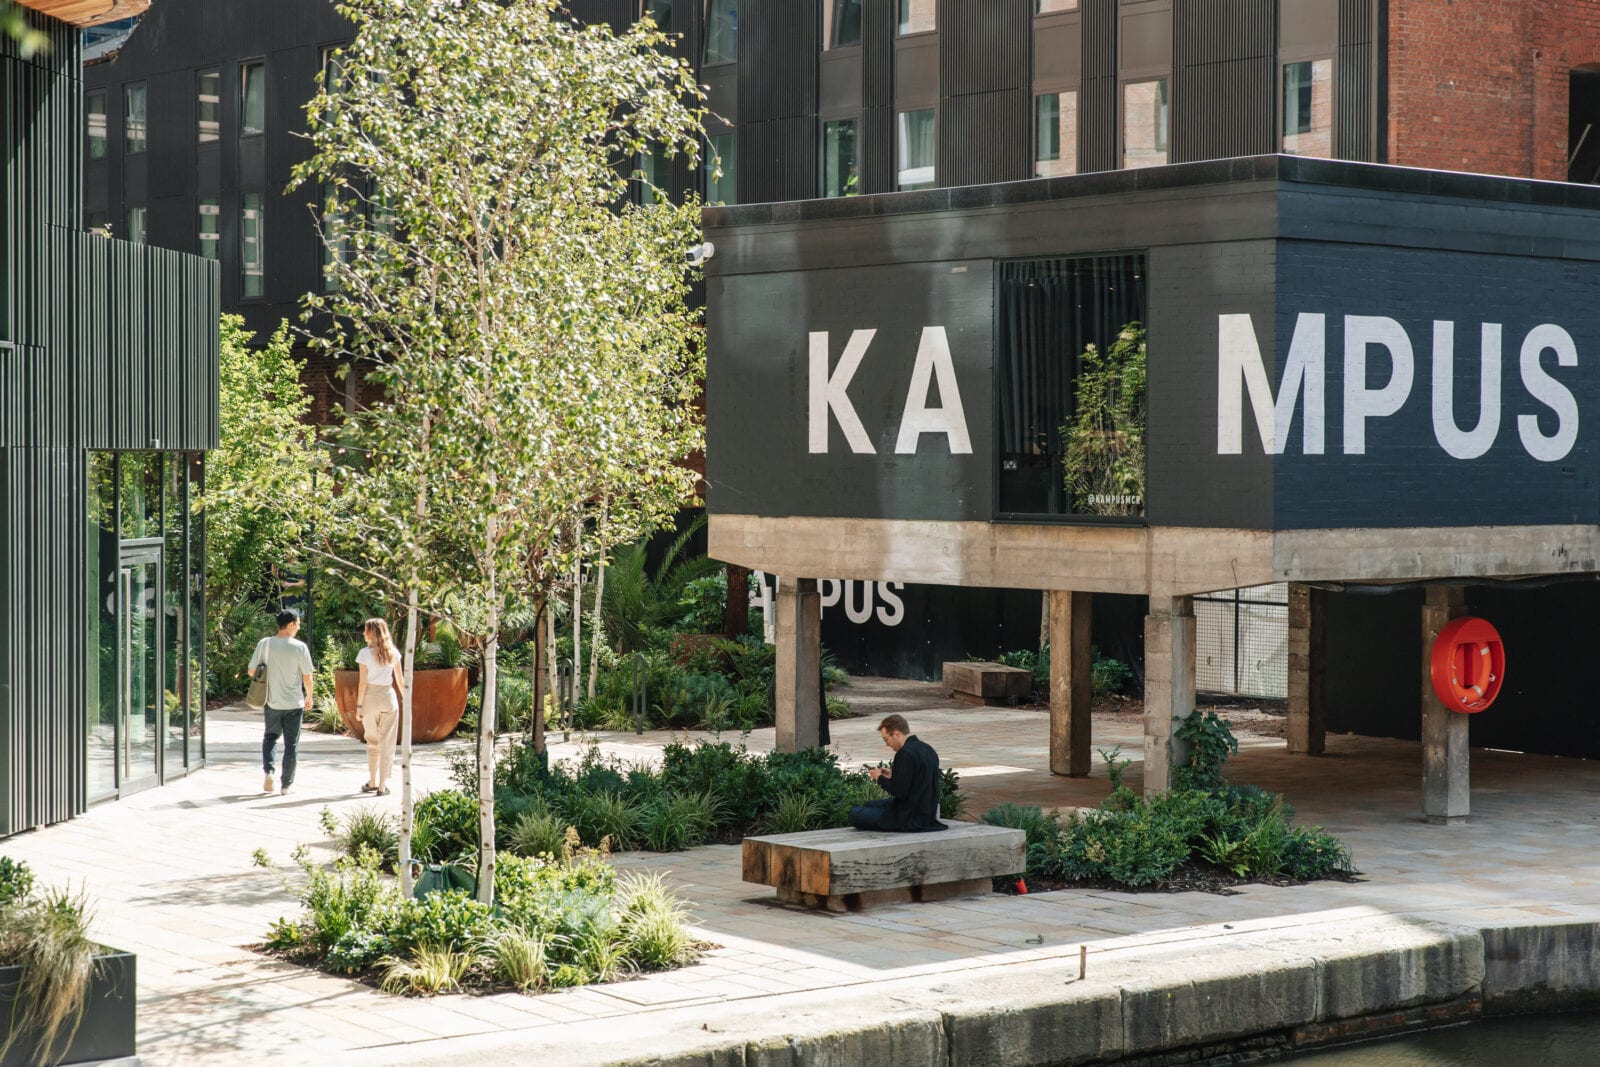 Kampus&#8217;s restaurant-on-stilts to become bakery, florist and bagel shop, The Manc